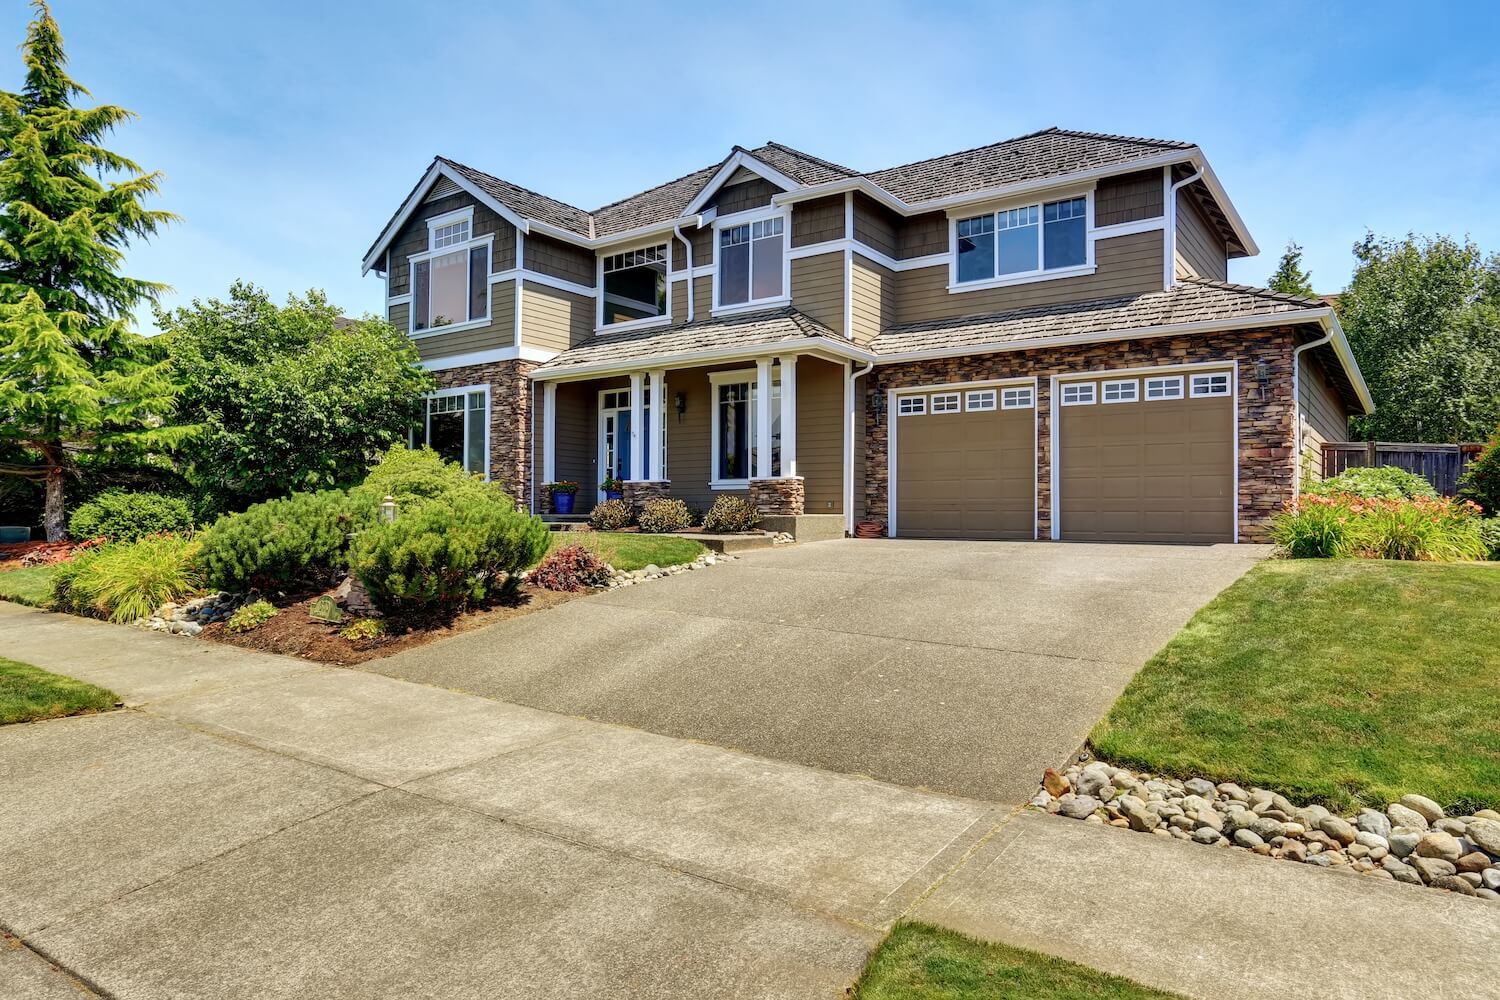 The Cost Of A New Roof In Oregon What You Need To Know